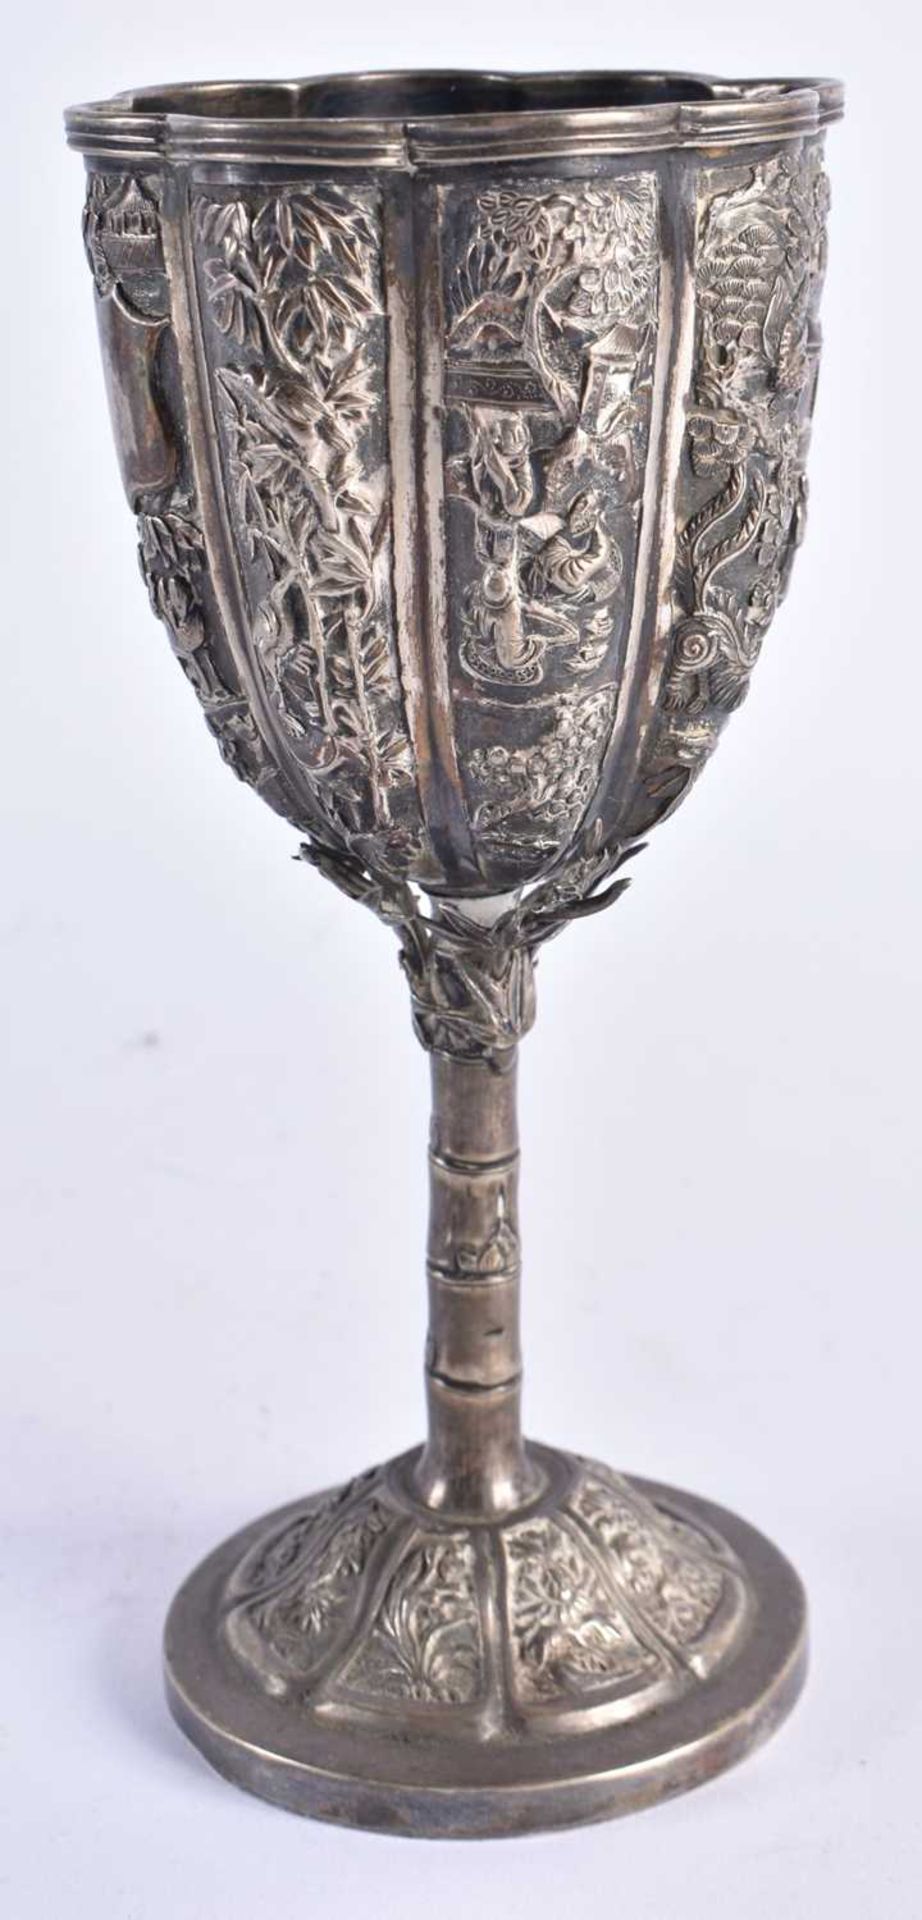 AN ANTIQUE CHINESE EXPORT SILVER REPOUSSE CUP. 202 grams. 17 cm high. - Image 2 of 7